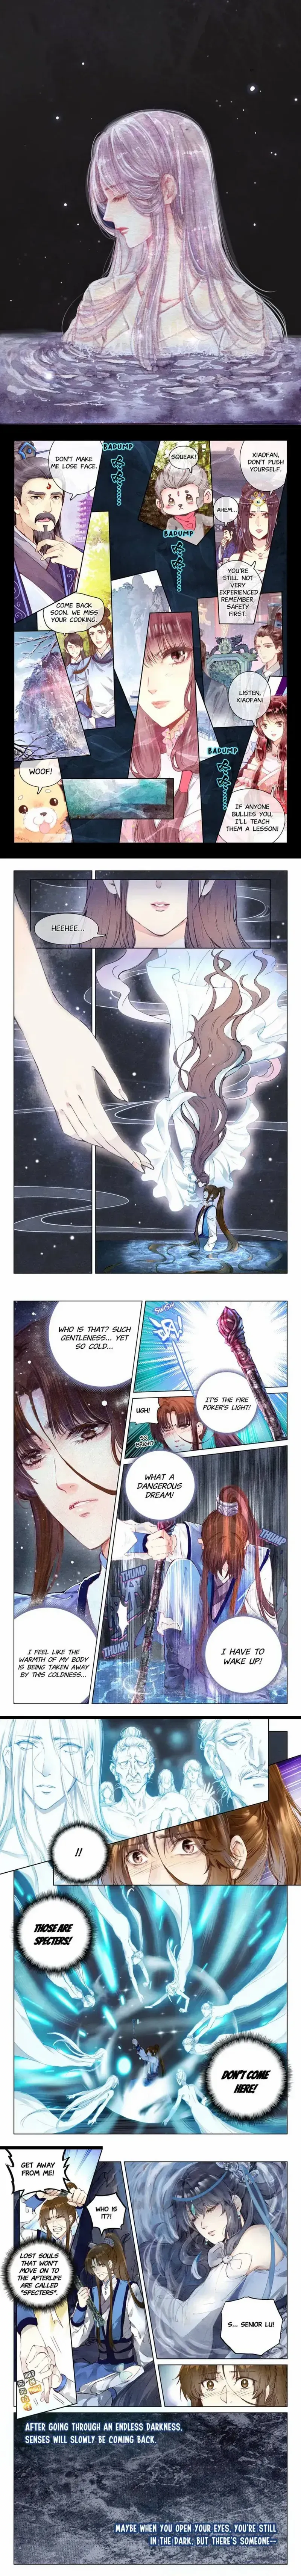 Celestial Destroyer Chapter 13 page 2